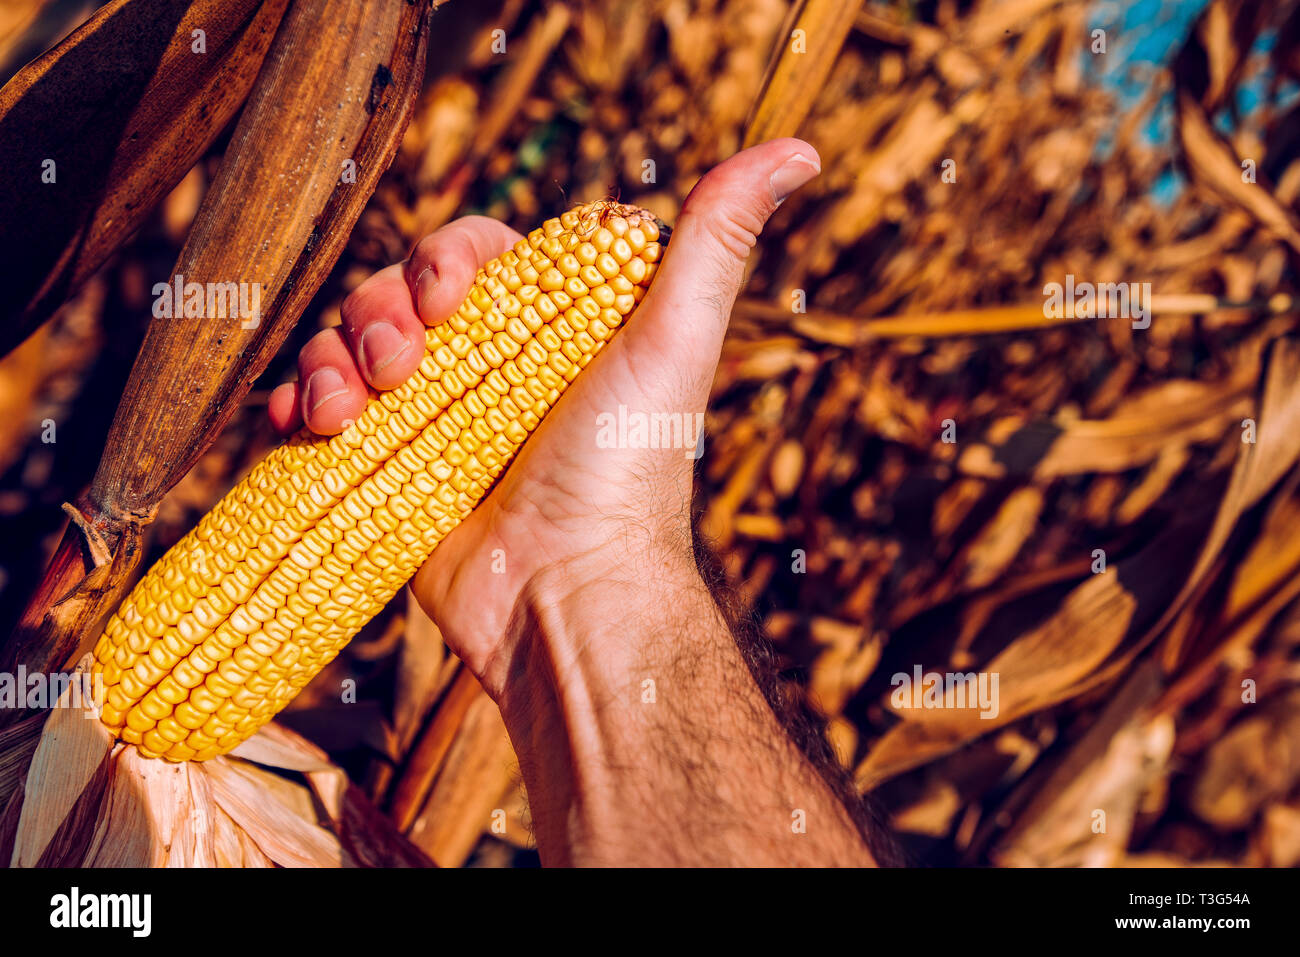 Hand picking corn cobs in field. Farm worker harvesting ripe maize crops by hands and gesturing thumbs up Stock Photo